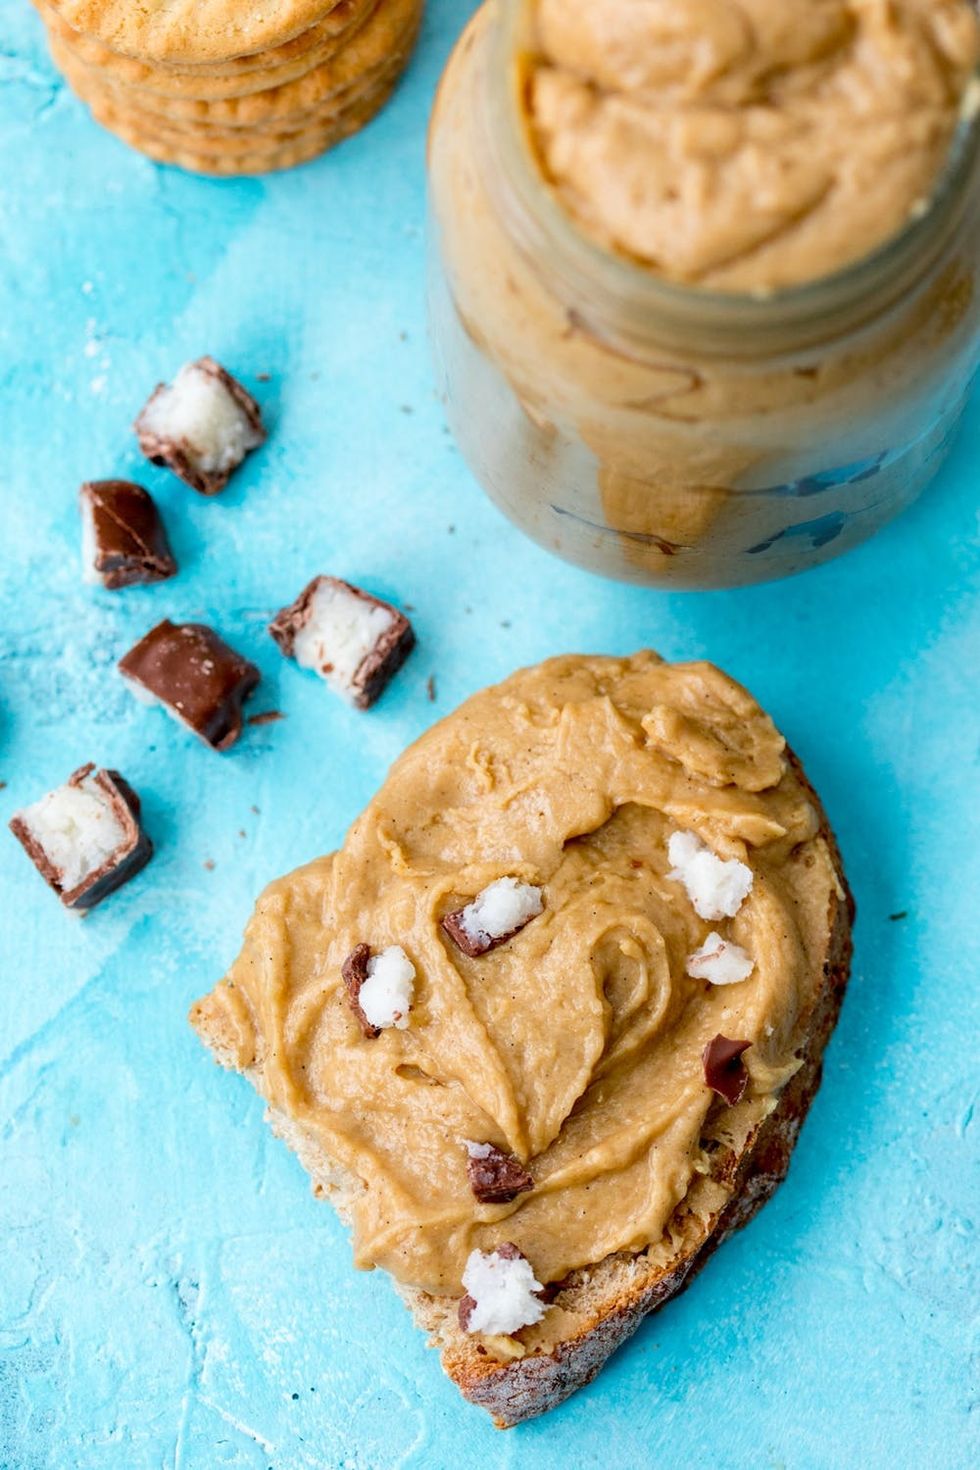 Forget Speculoos Spread - this coconut cookie butter recipe is awesome!